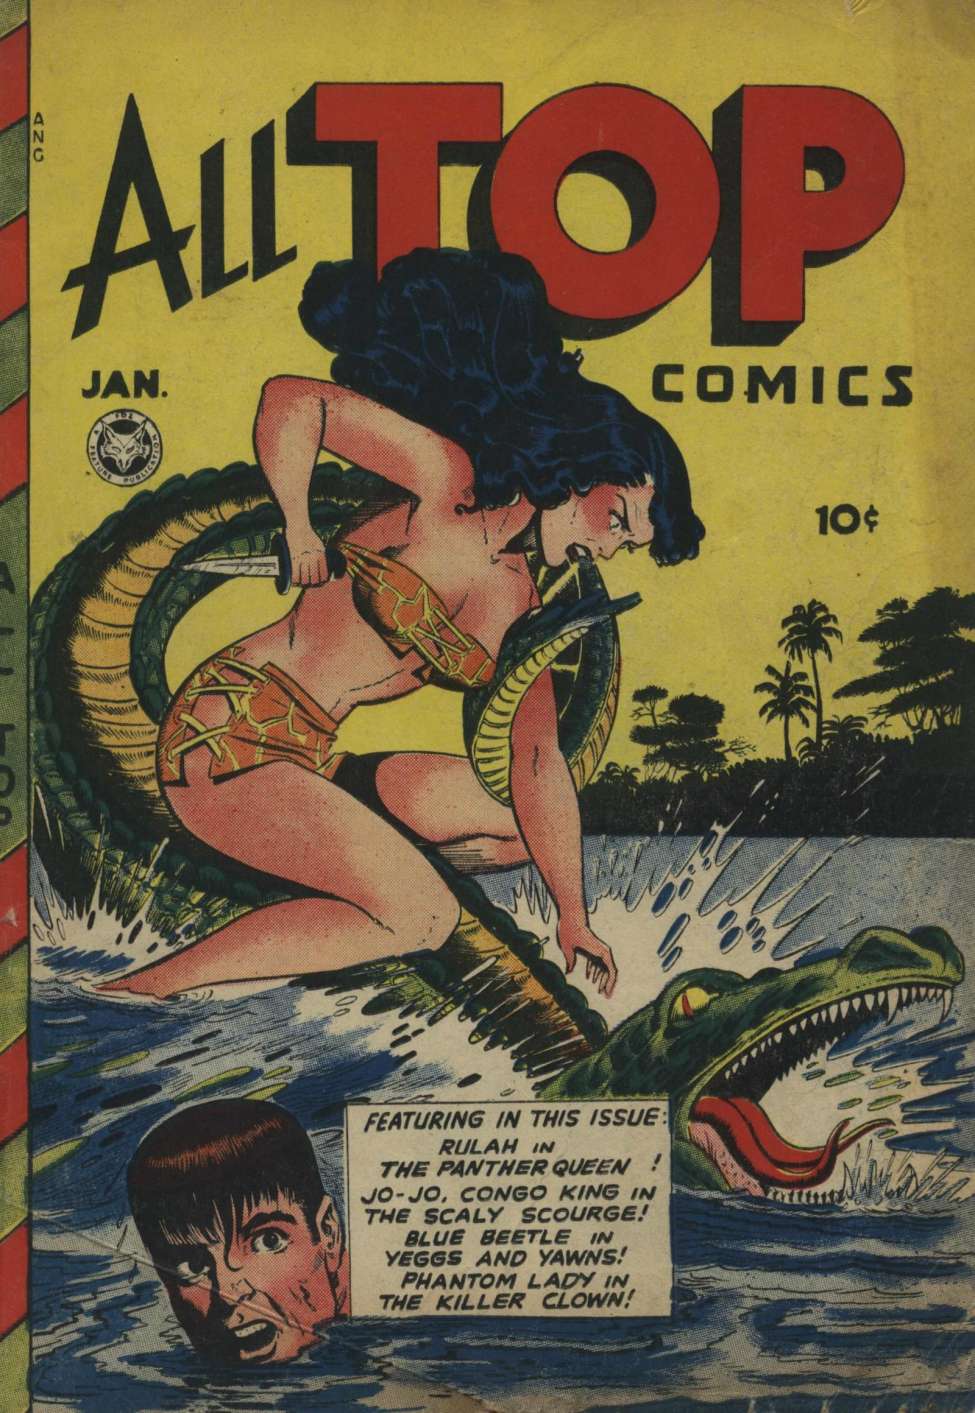 Book Cover For All Top Comics 9